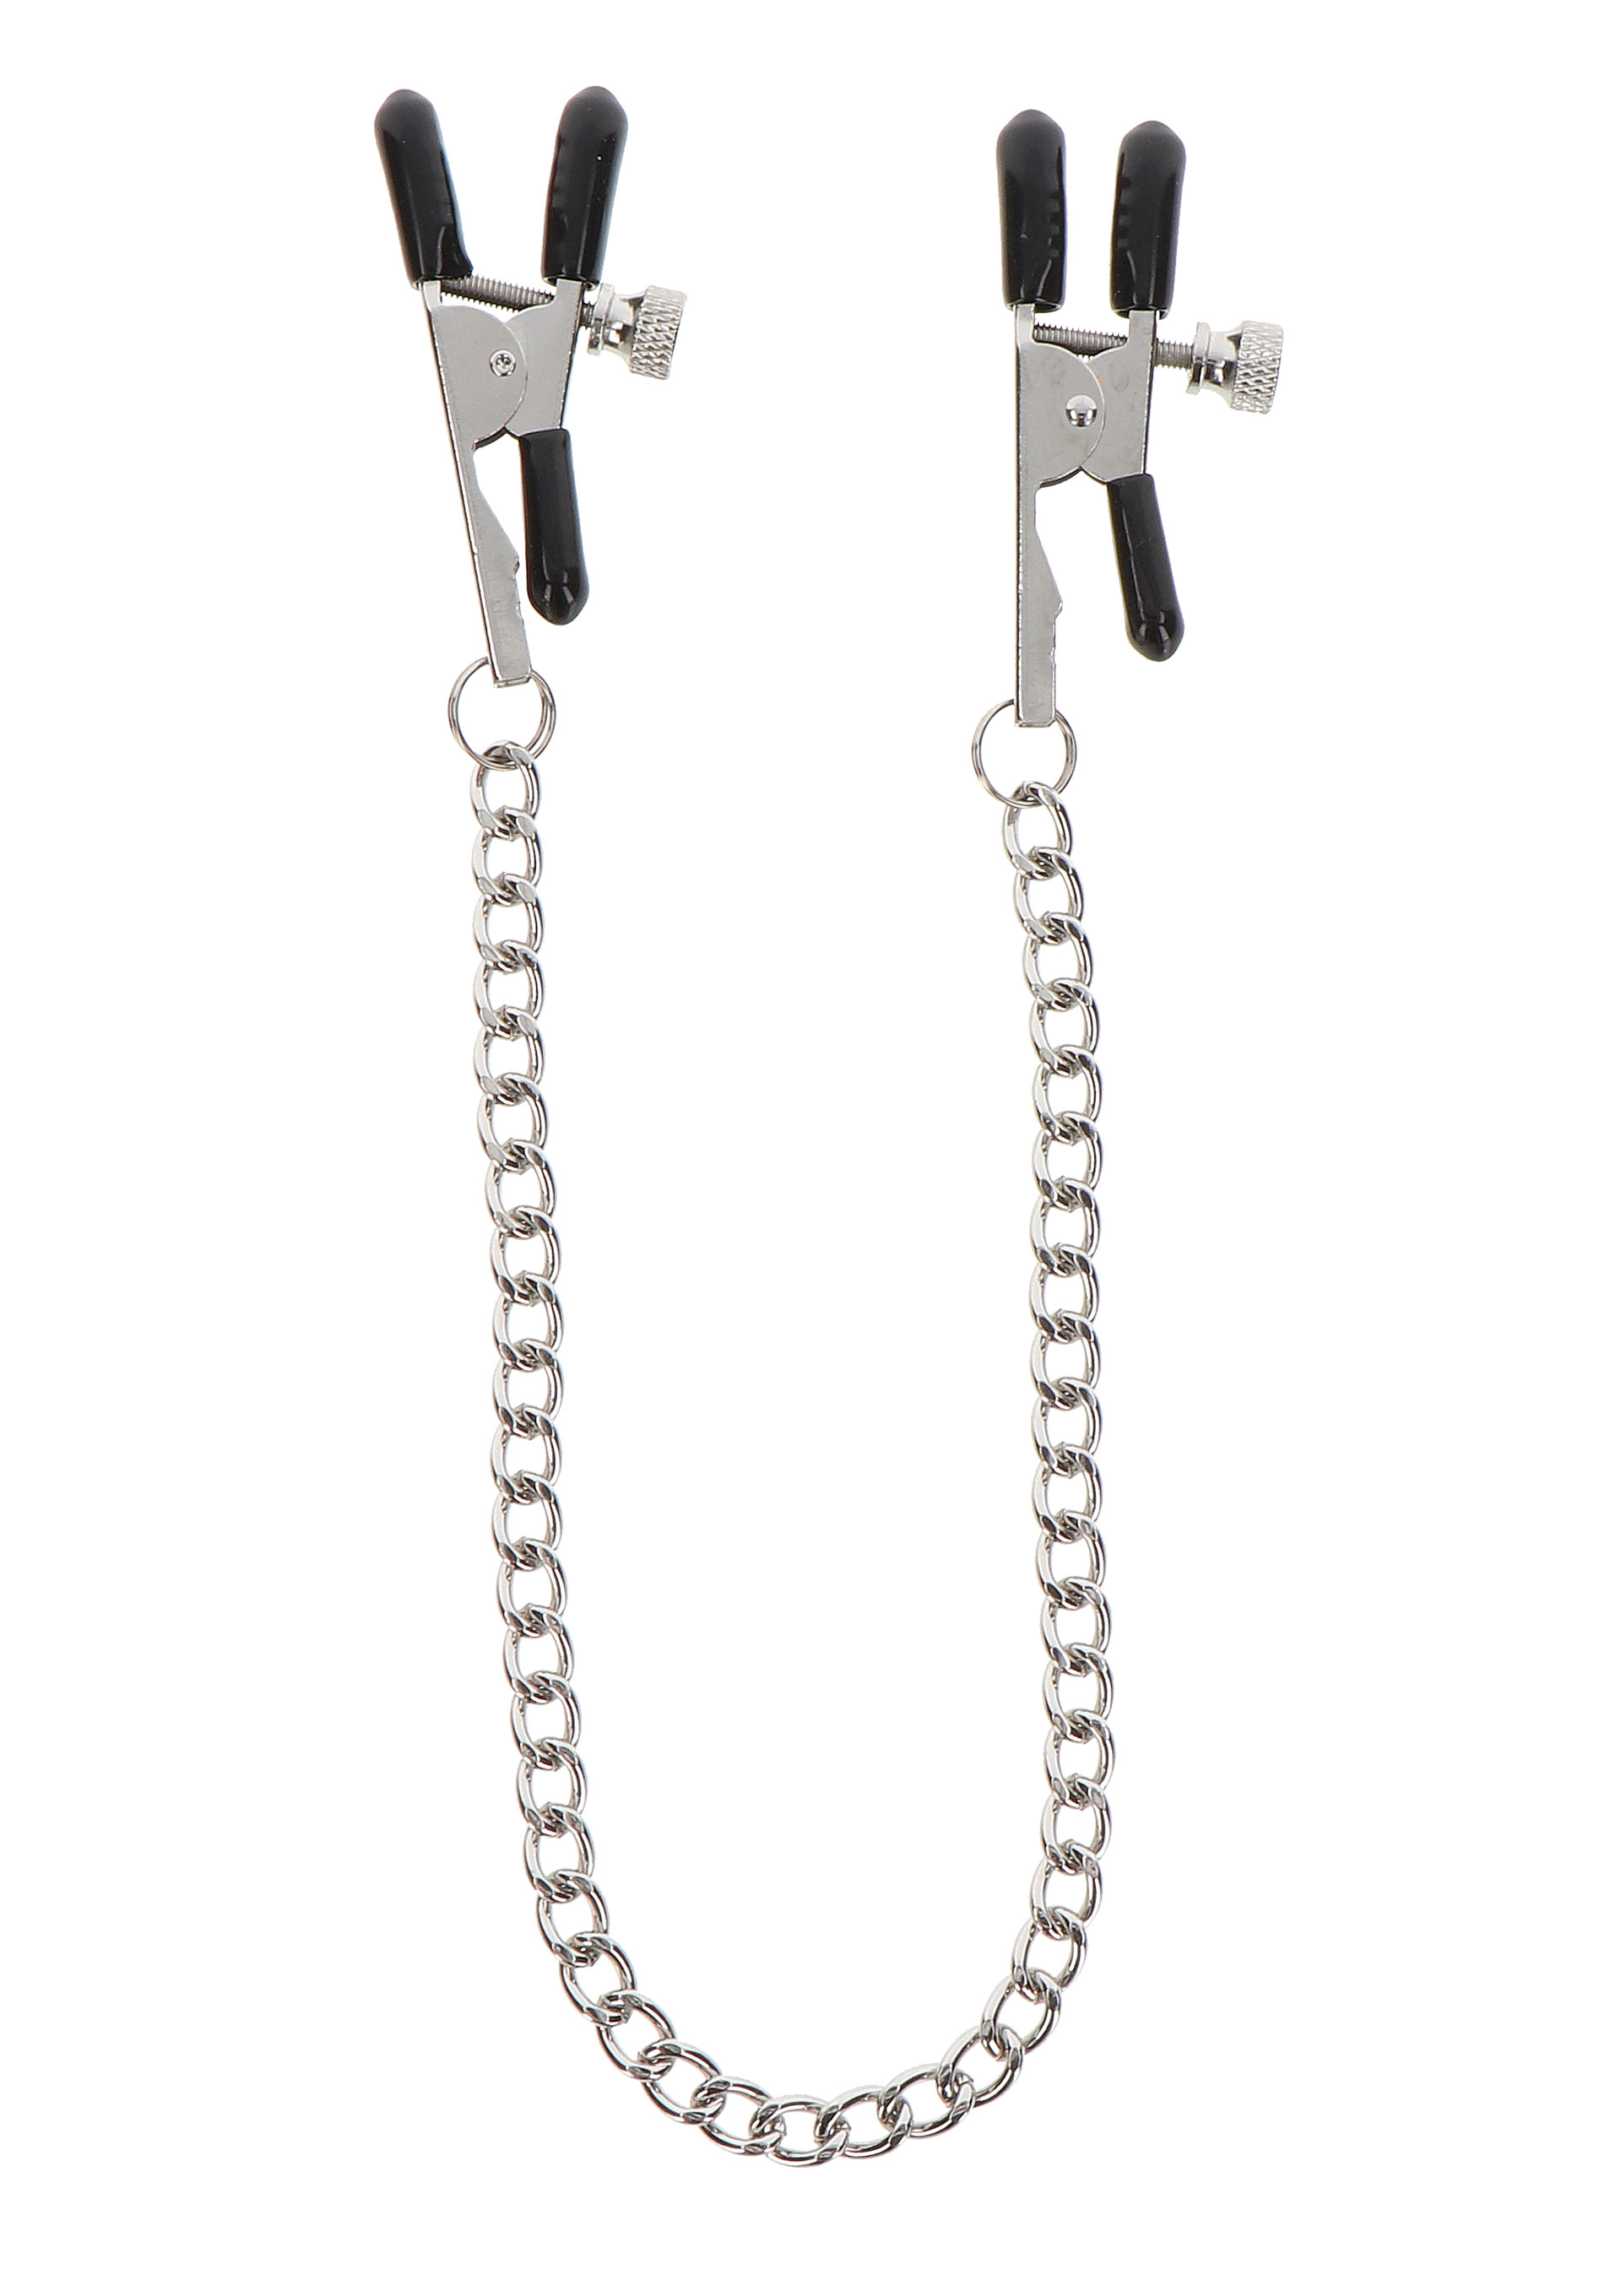 Taboom - Taboom Adjustable Clamps with Chain